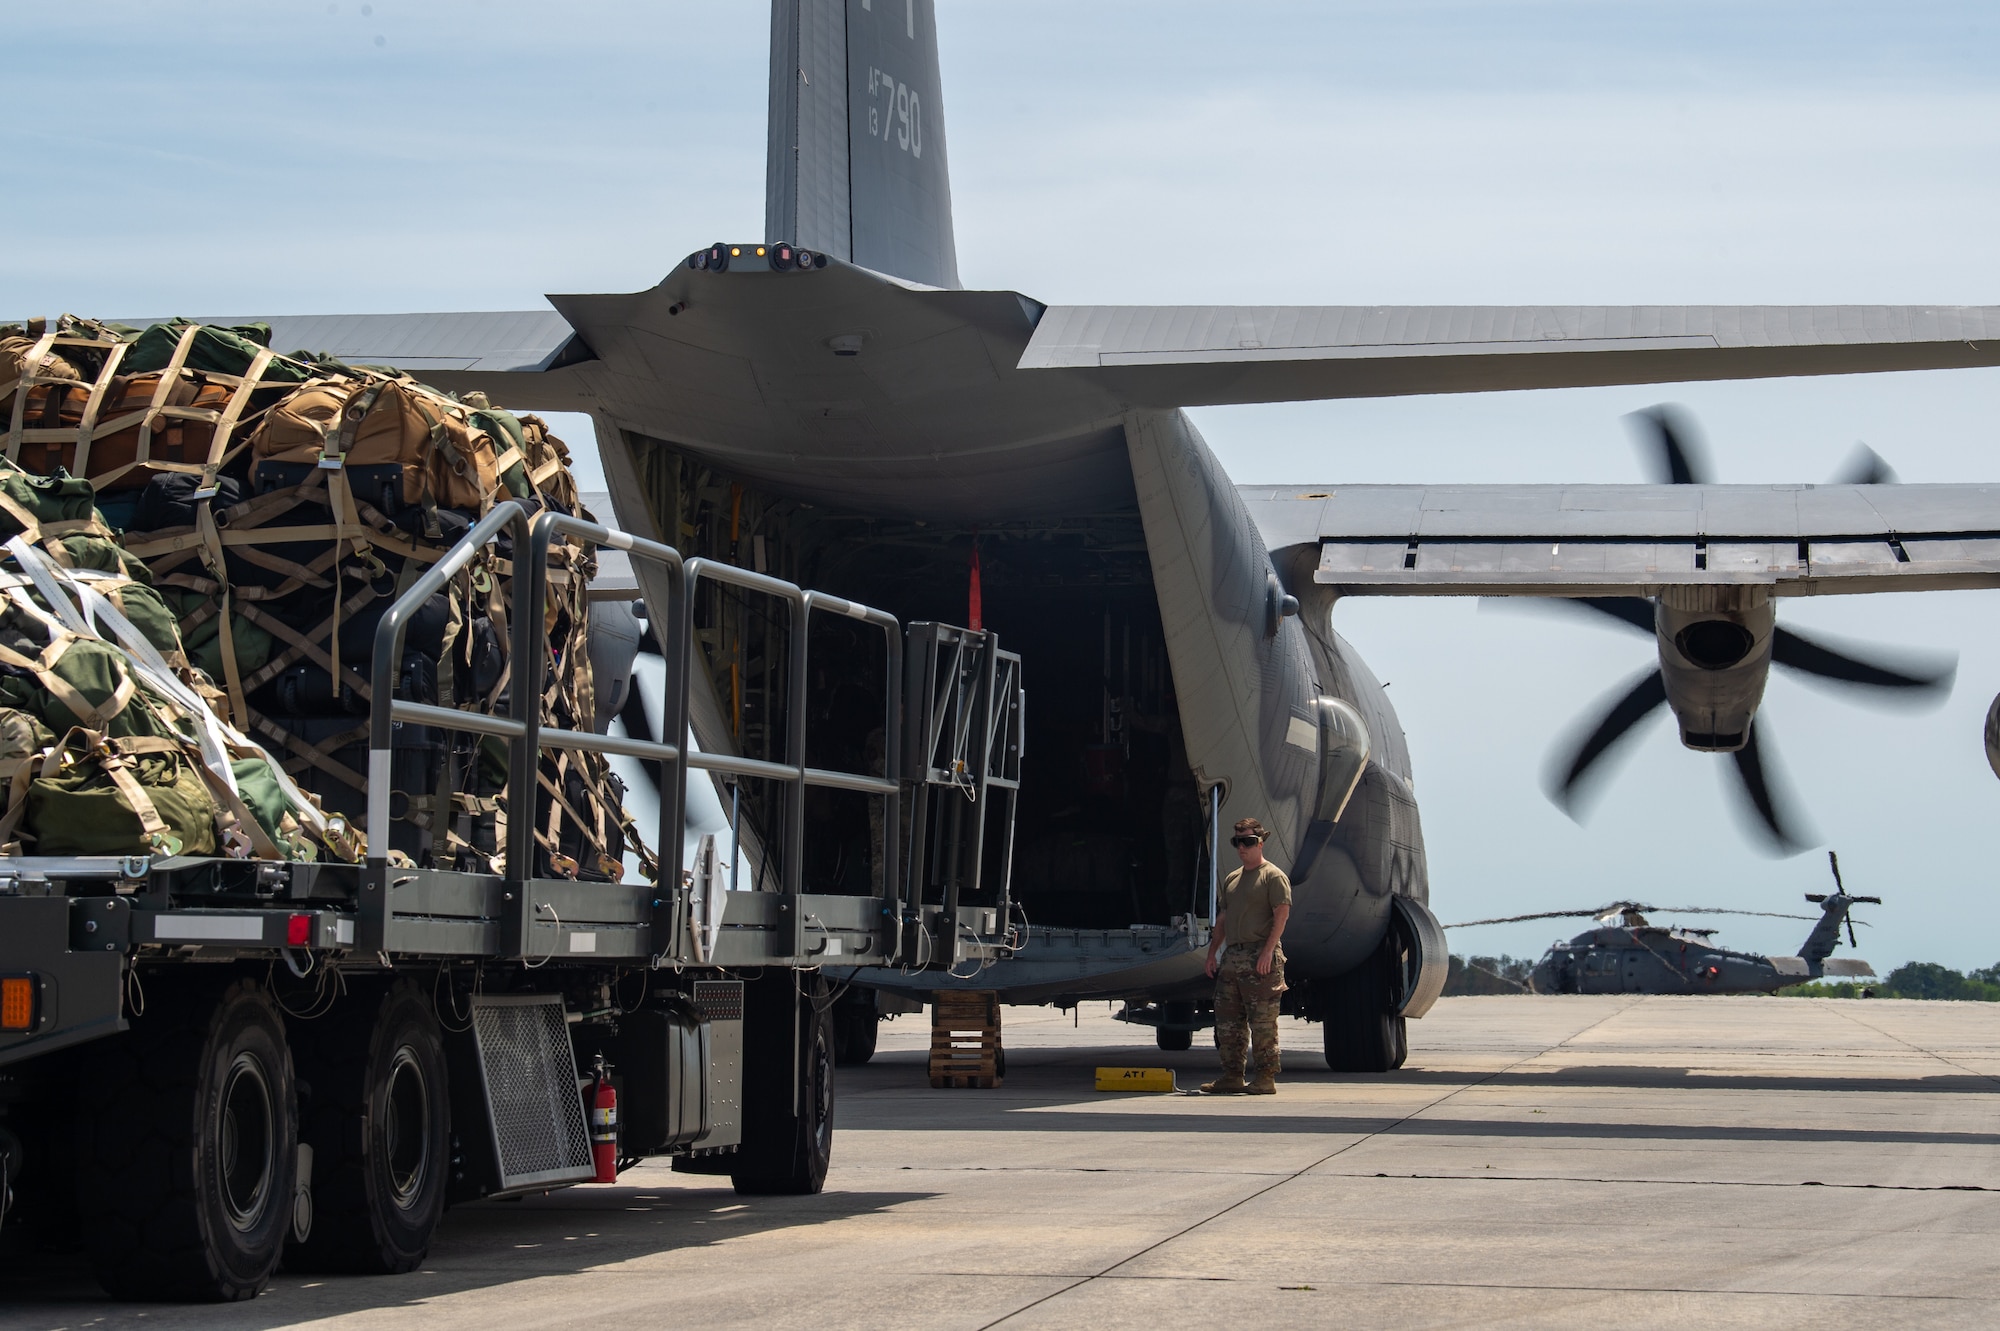 A U.S. Air Force Airman assigned to the 23rd Wing prepares to load luggage onto an HC-130J Combat King II in support of Exercise Ready Tiger at Moody Air Force Base, Georgia, April 8, 2024. The luggage was vital to the mission as it held the departing Airmen’s personal bags and equipment. Built upon Air Combat Command's directive to assert air power in contested environments, Exercise Ready Tiger 24-1 aims to test and enhance the 23rd Wing’s proficiency in executing Lead Wing and Expeditionary Air Base concepts through Agile Combat Employment and command and control operations. (U.S. Air Force photo by Airman 1st Class Iain Stanley)